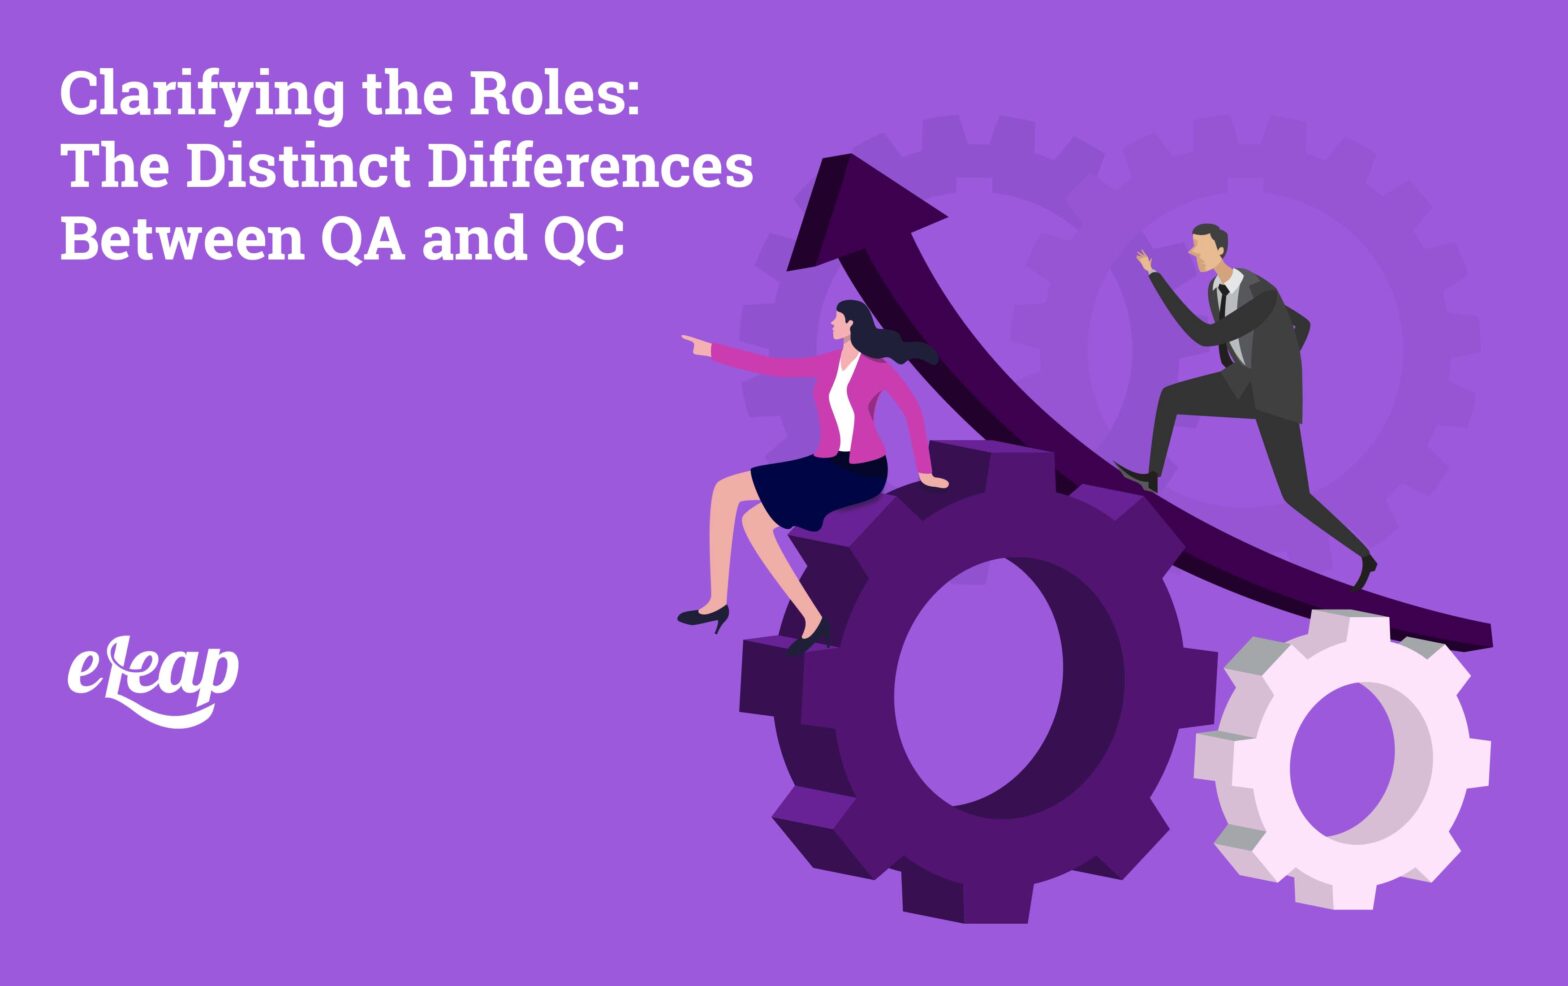 Clarifying the Roles: The Distinct Differences Between QA and QC